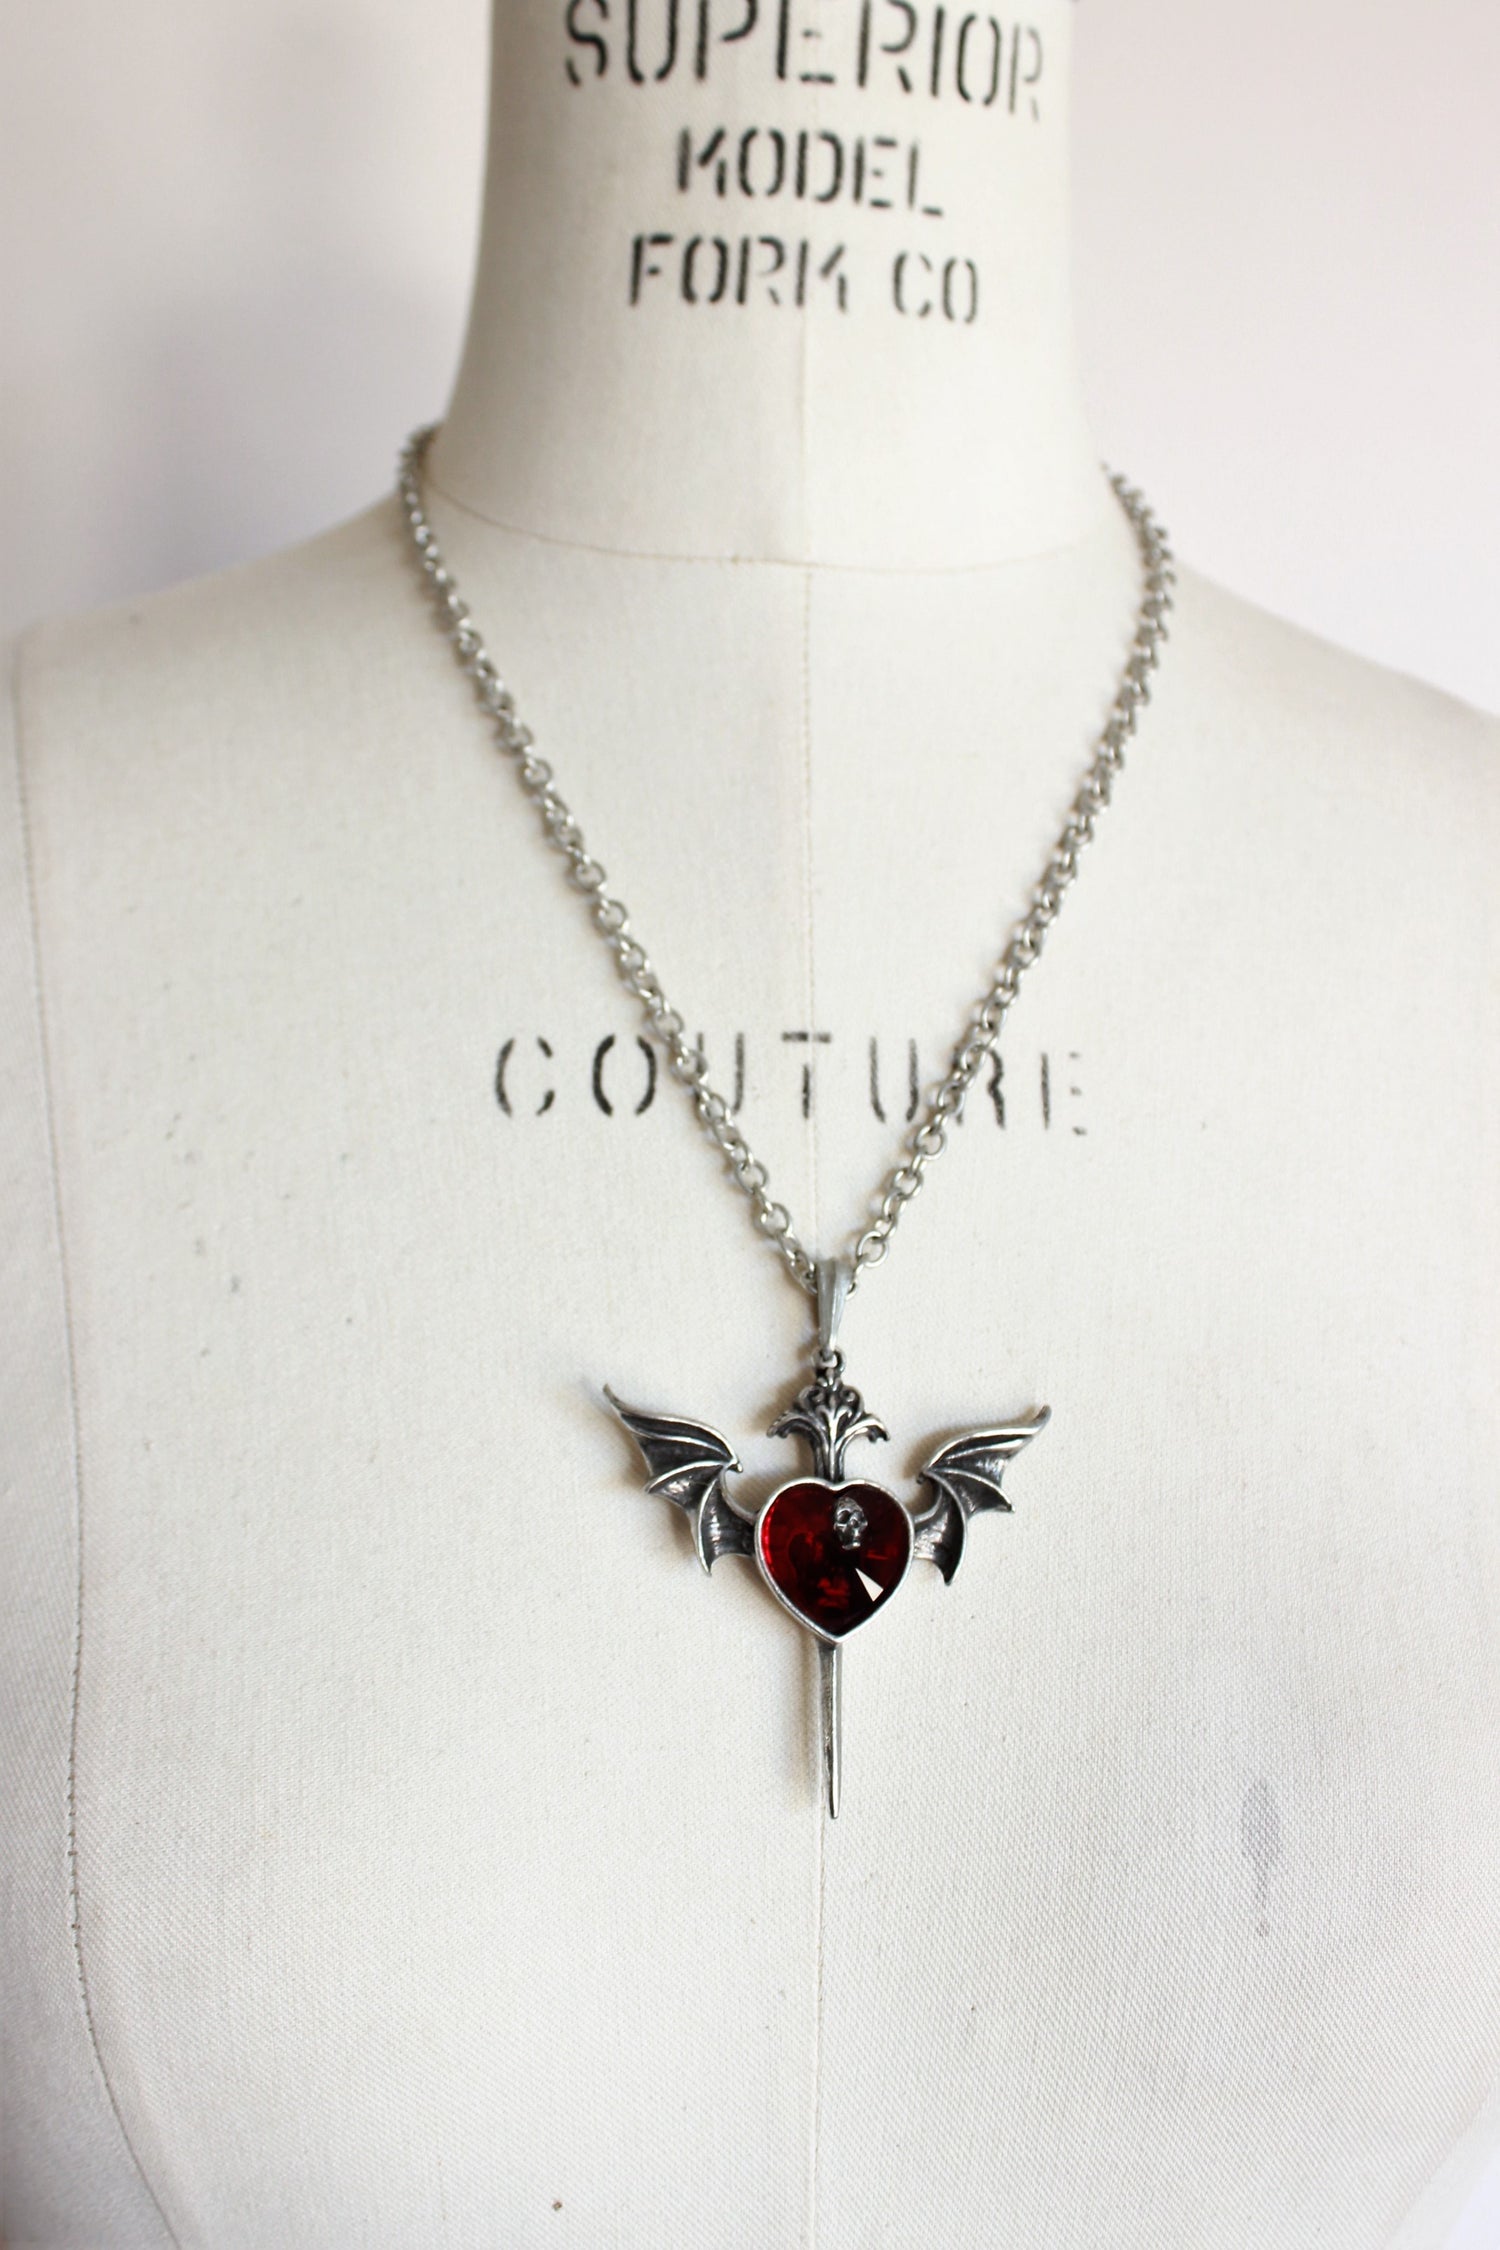 Alchemy Gothic "Death of a Vampire" Pendant Necklace